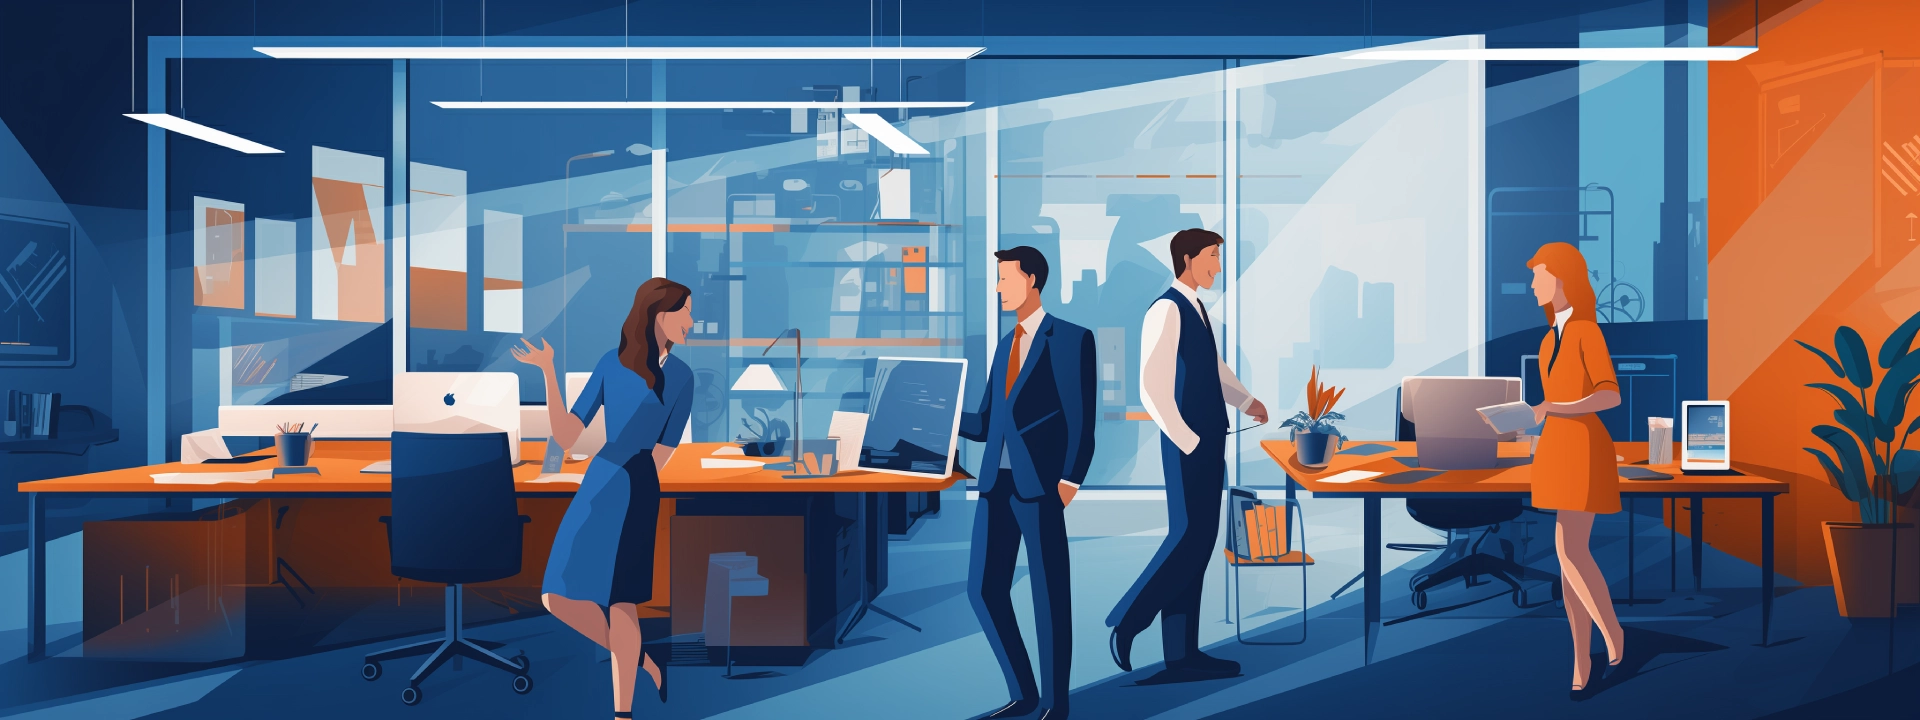 People chatting in a office drawn in cartoon style